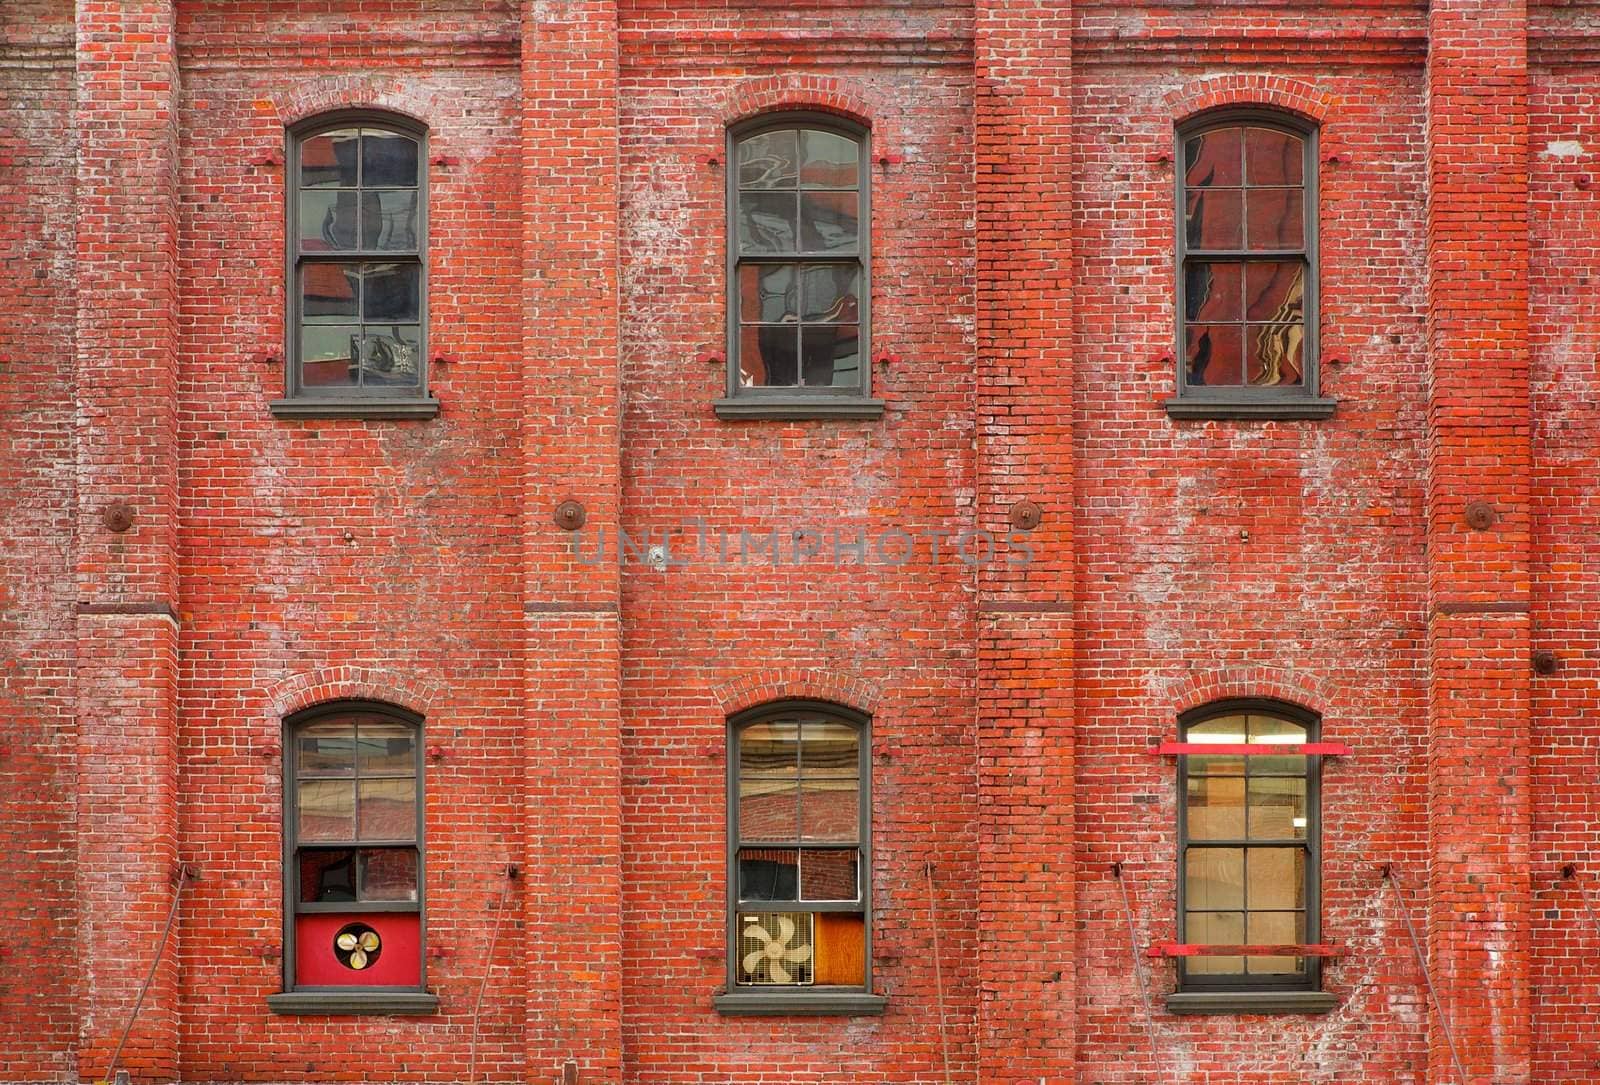 Three columns of windows on an old brick walled building